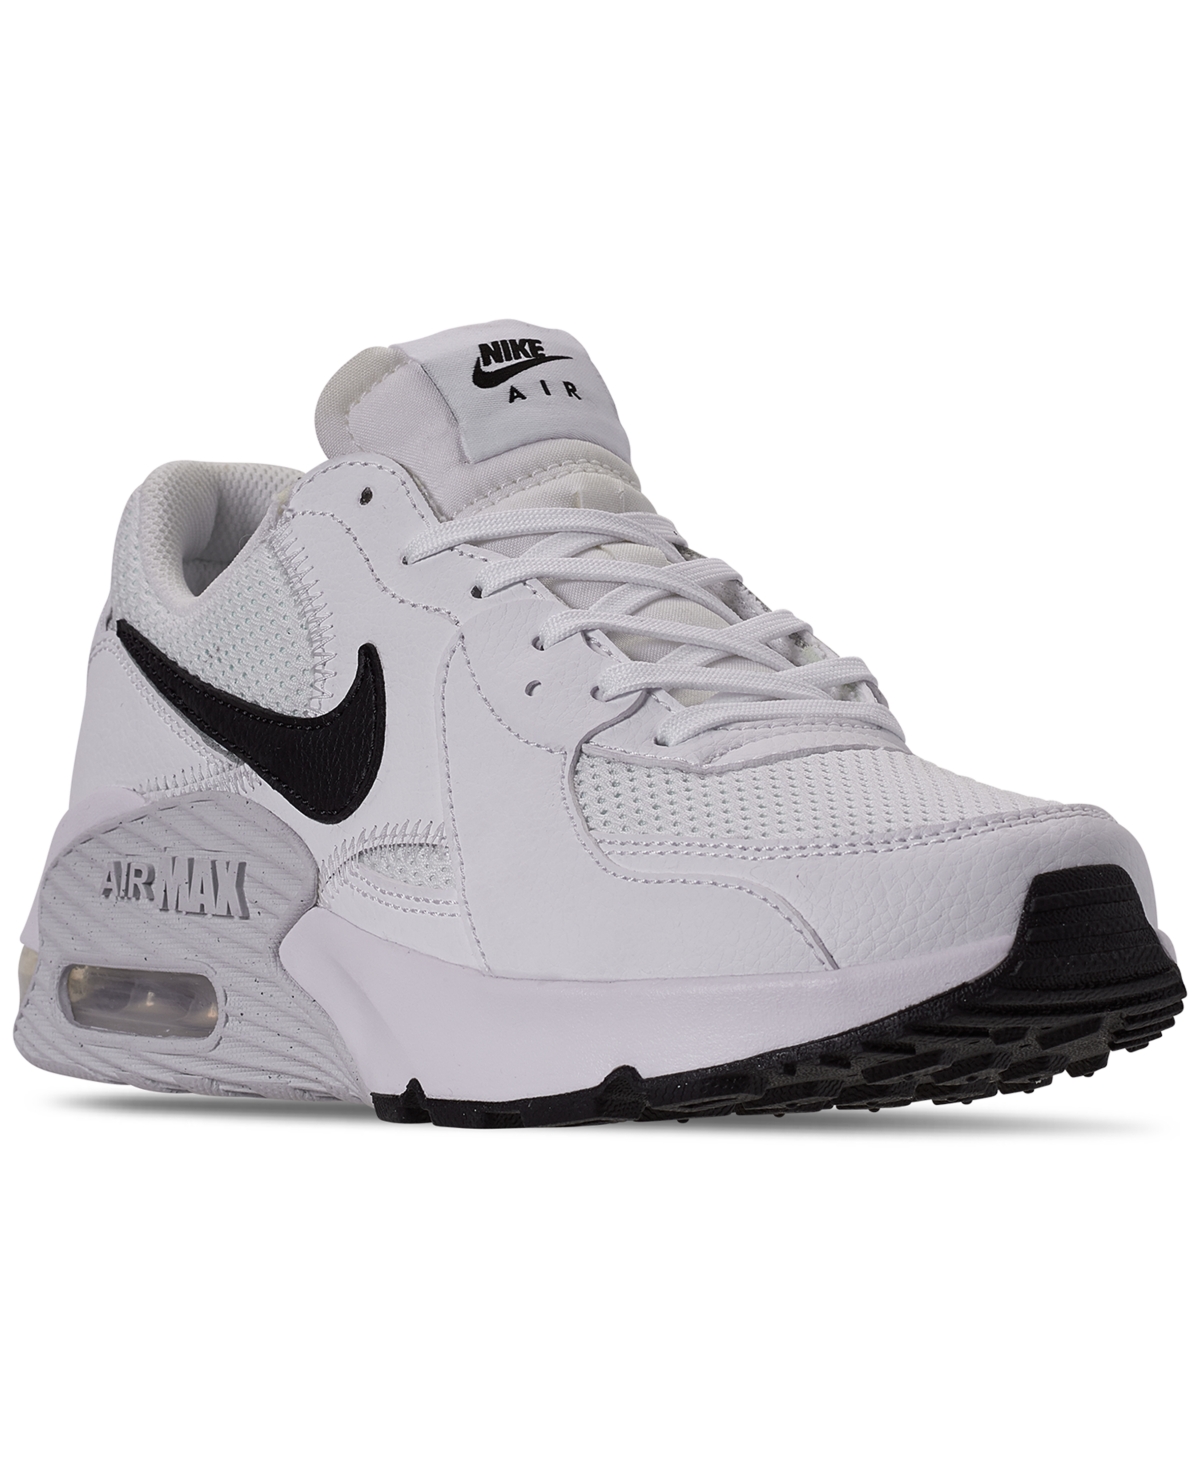 Nike Women's Air Max Excee Casual Sneakers from Finish Line & - Finish Line Women's Shoes - Shoes - Macy's